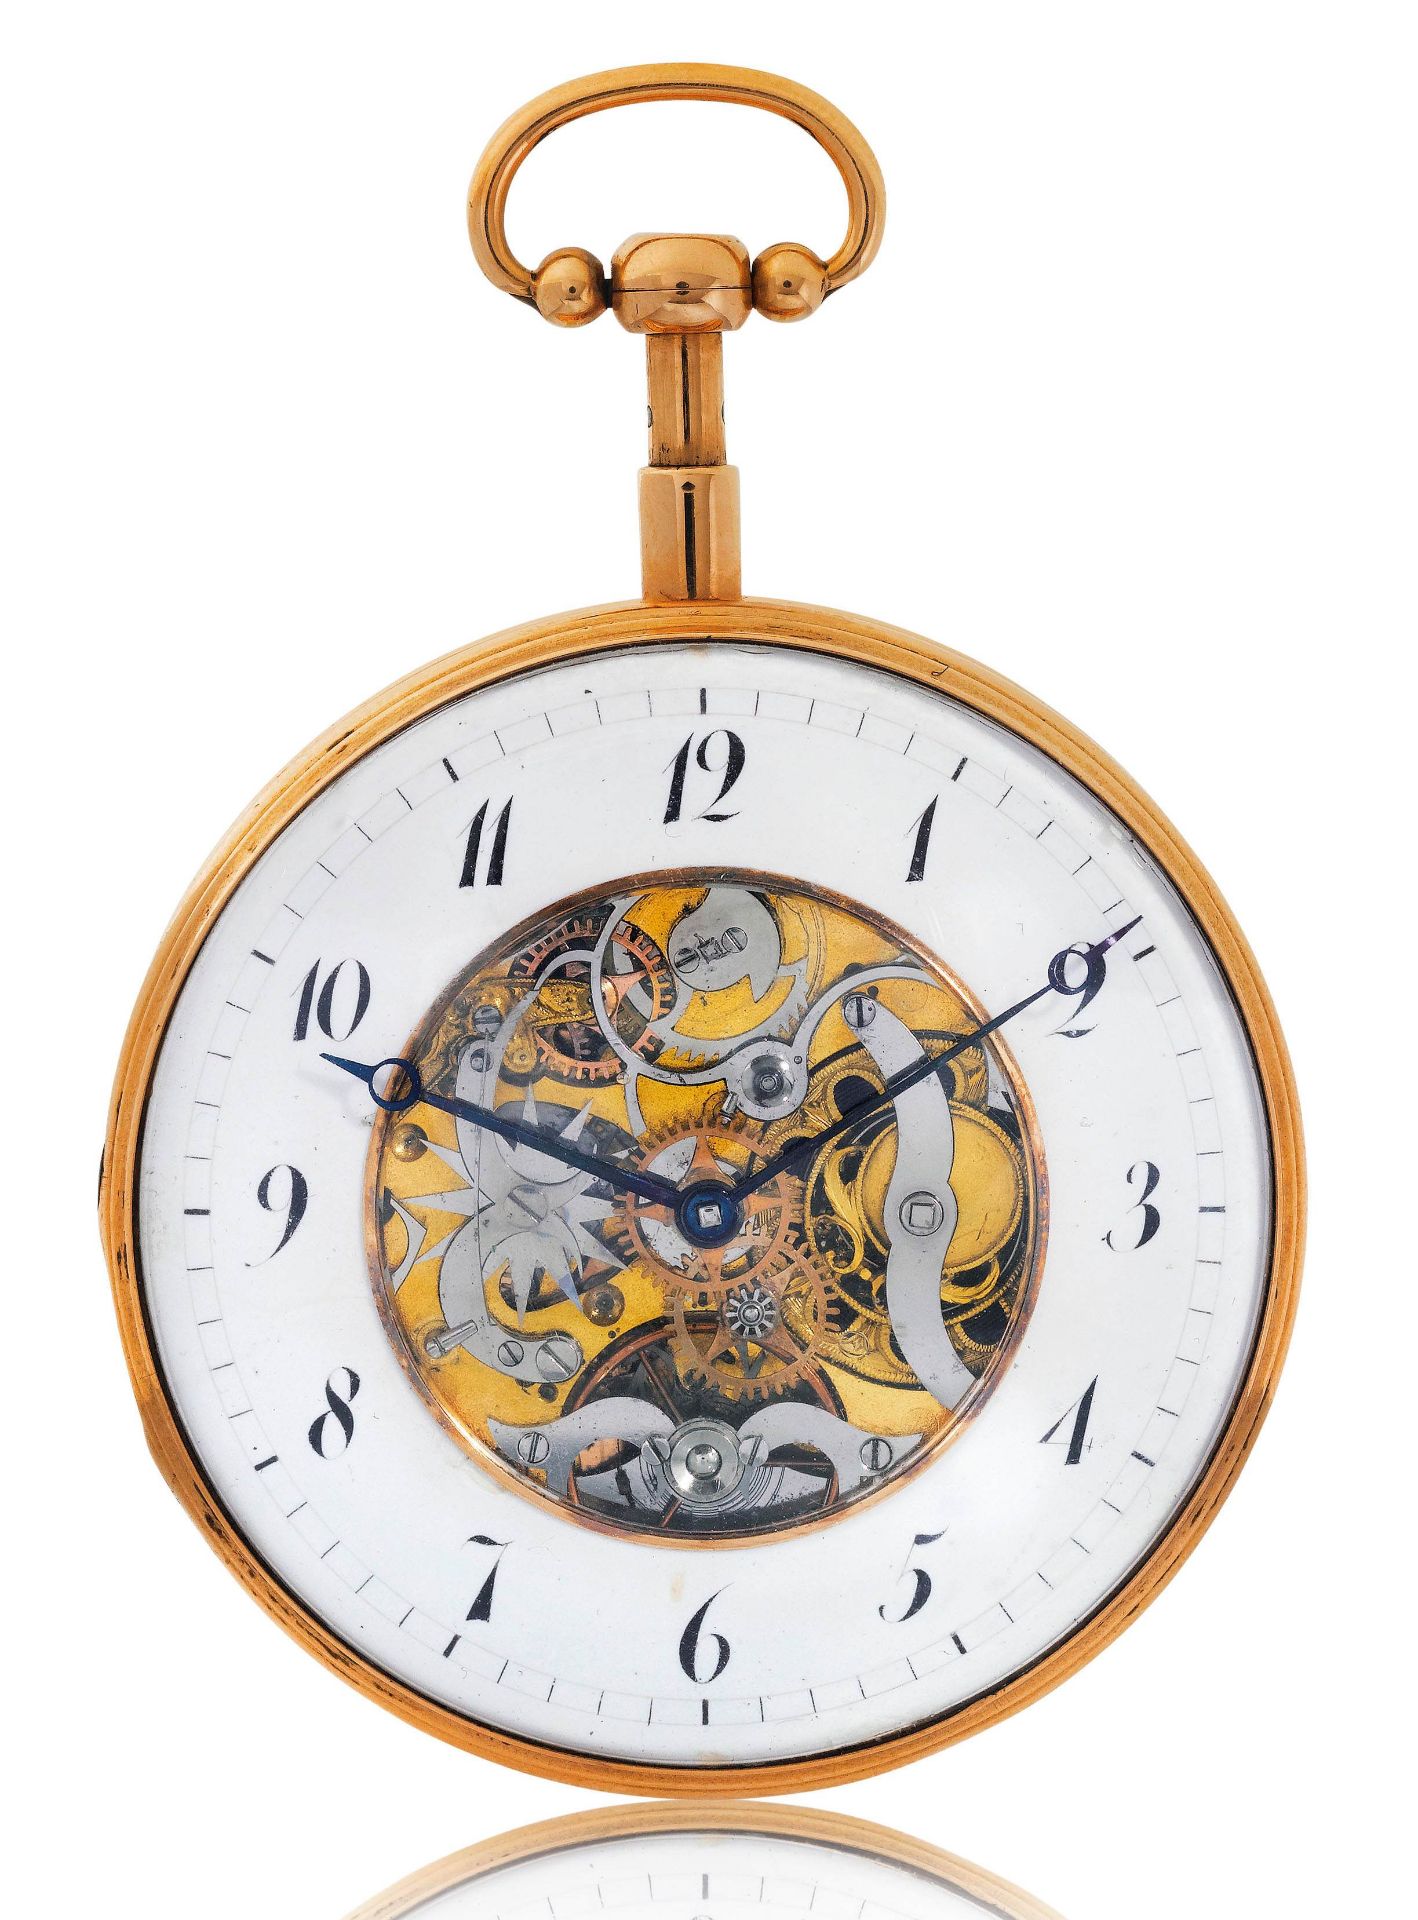 Vaucher Fréres, rare, attractive, large skeleton watch with minute repeater, ca. 1780.